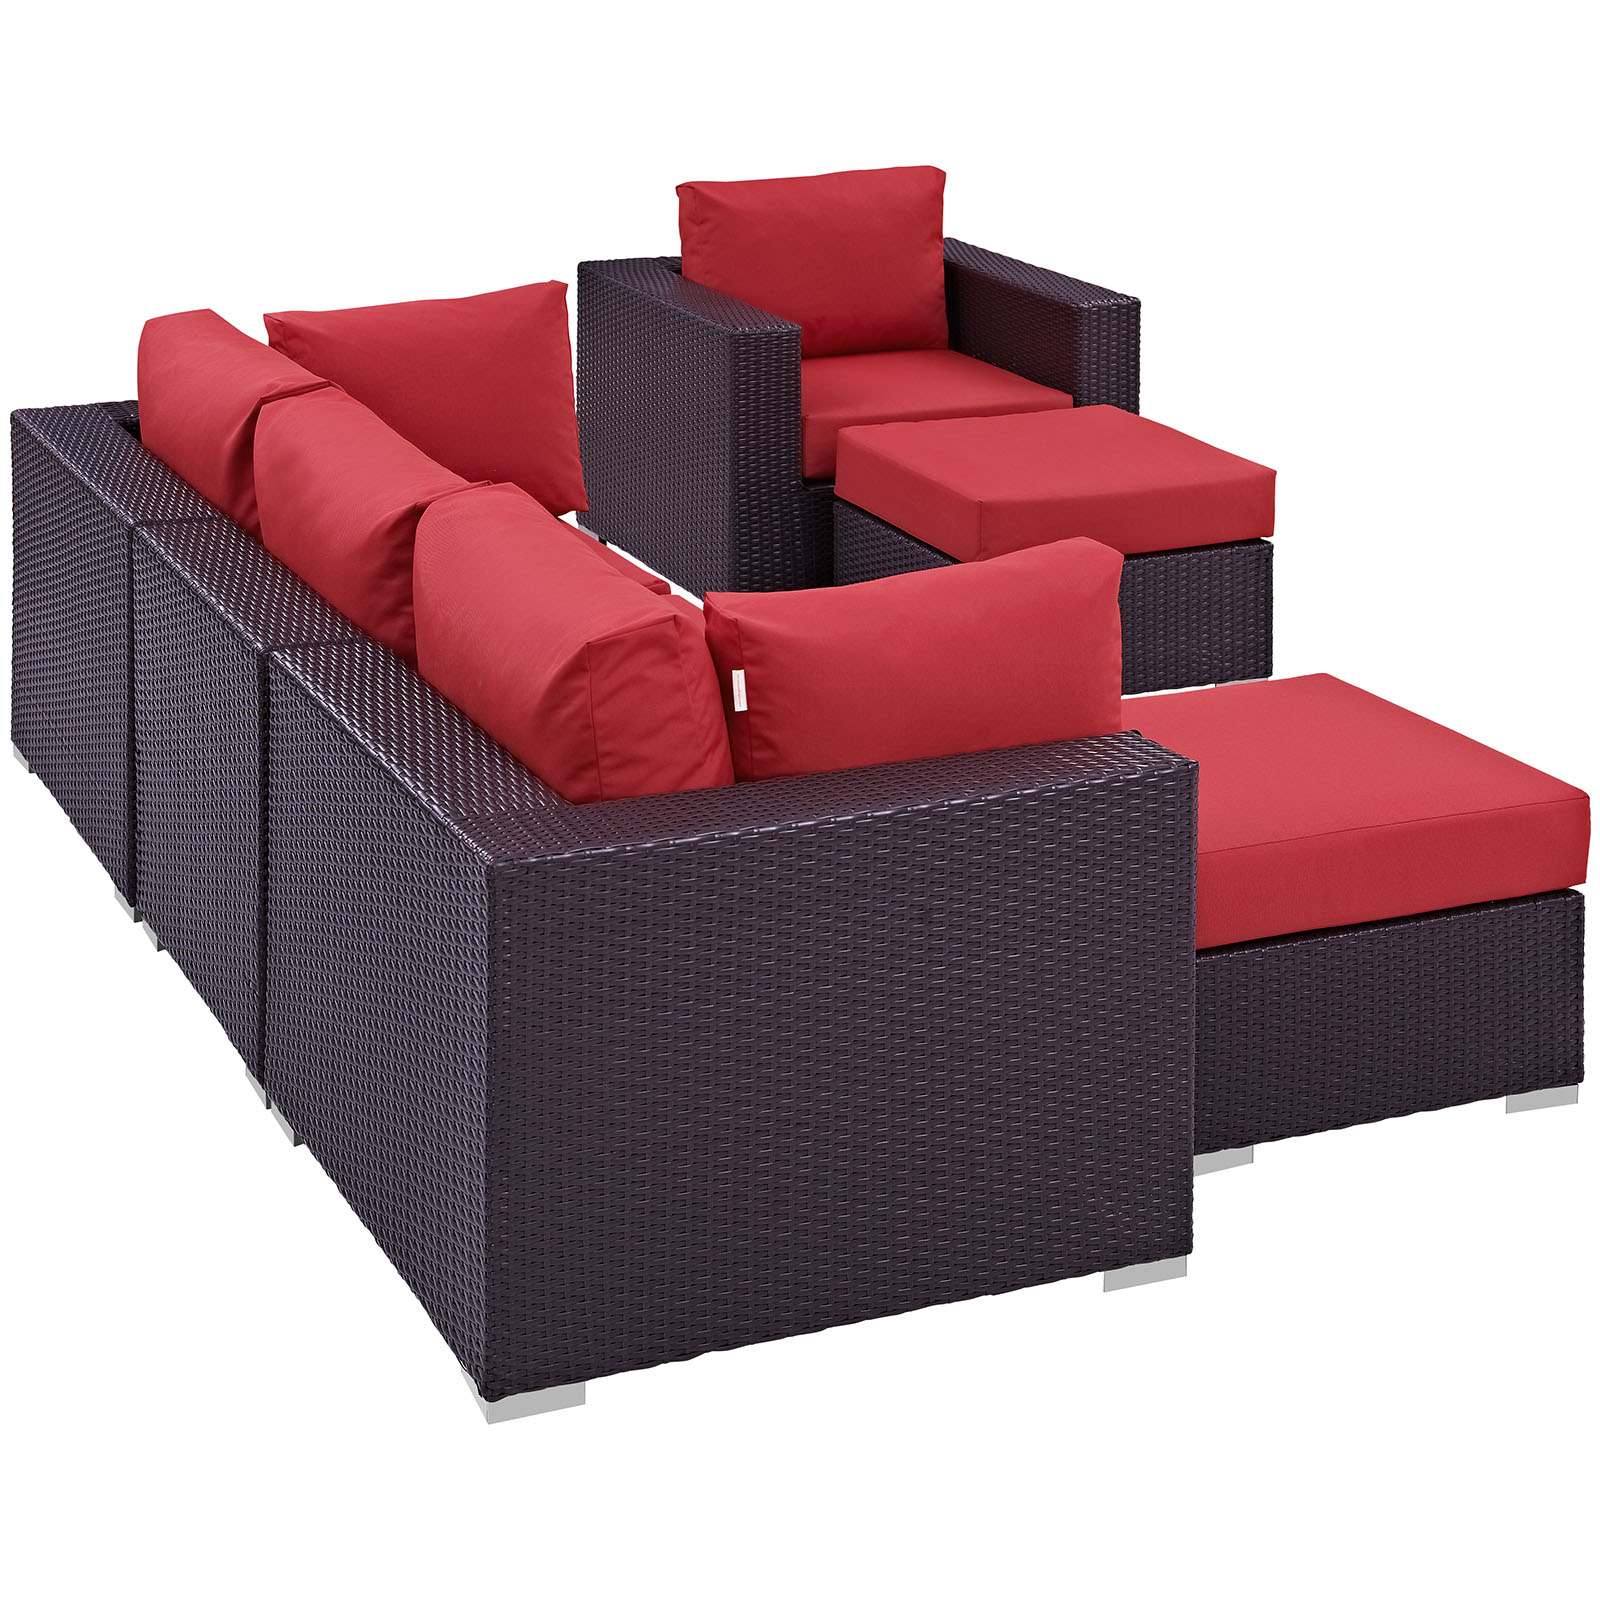 Modway Convene 6 Piece Patio Sofa Set in Espresso and Red - image 3 of 8